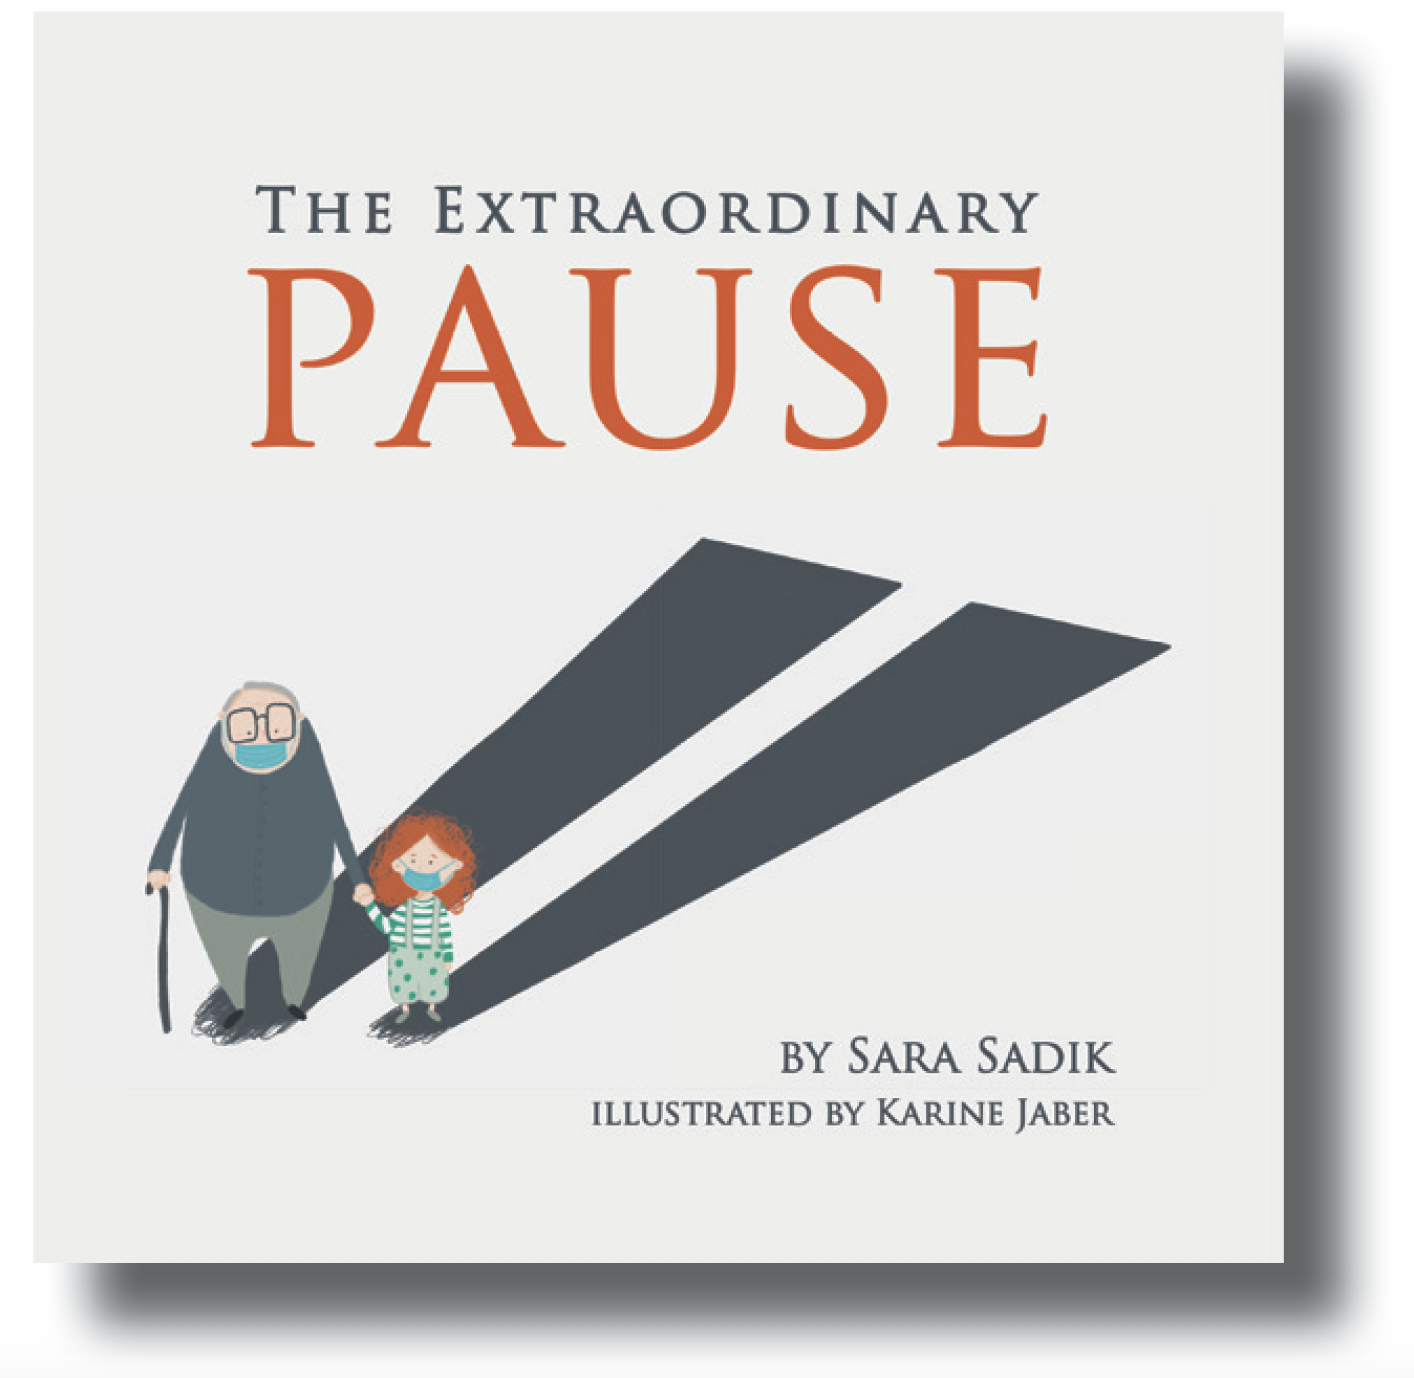 Just in Time for Back-to-School, Eifrig Publishing Helps Kids Process What They Have Lost and Learned During the Pandemic with a New Book, "The Extraordinary Pause"